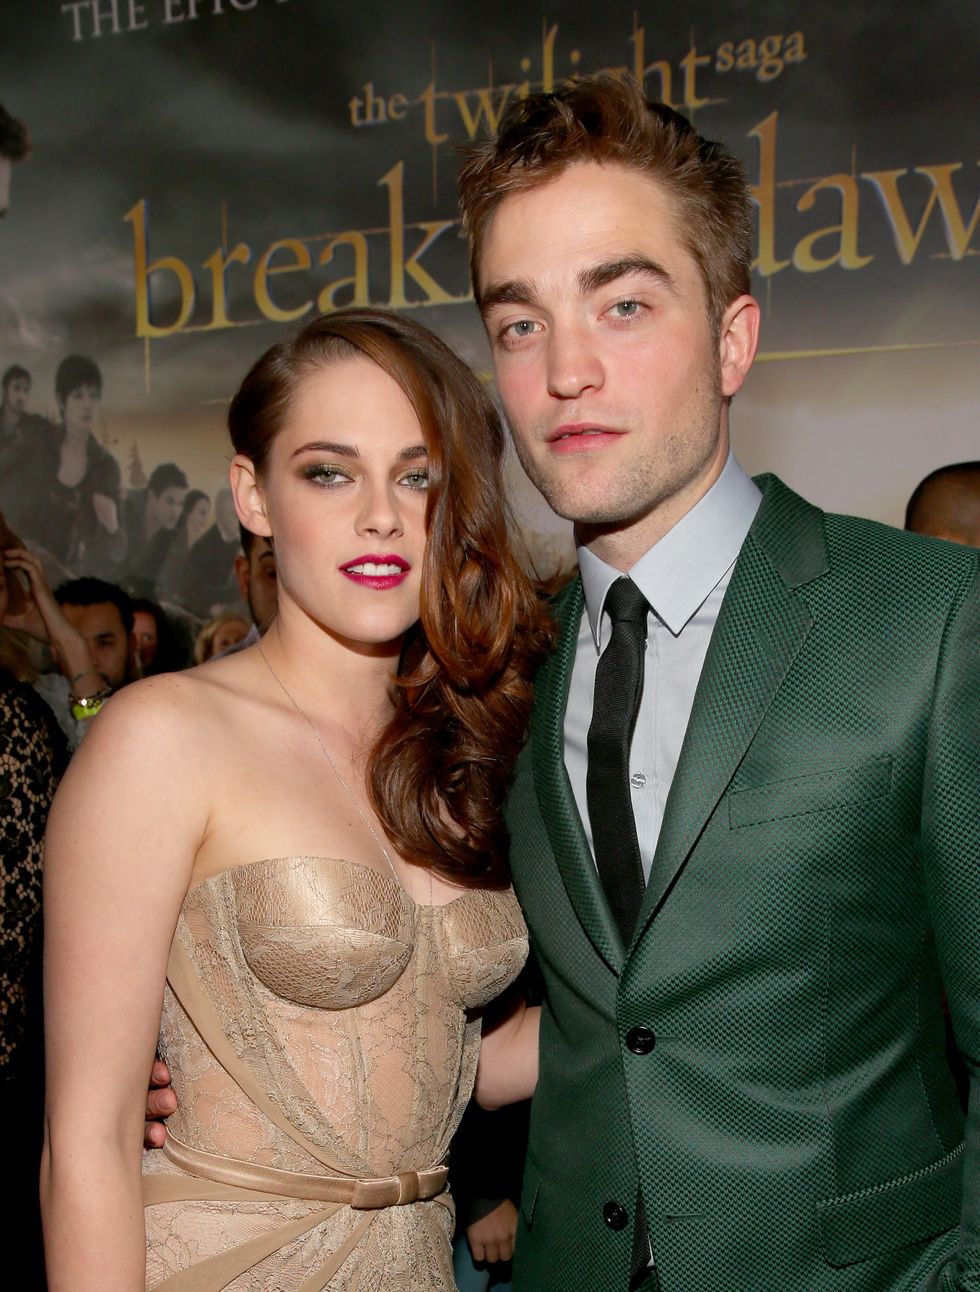 kristen stewart talks being queer and ‘caginess' while dating robert pattinson